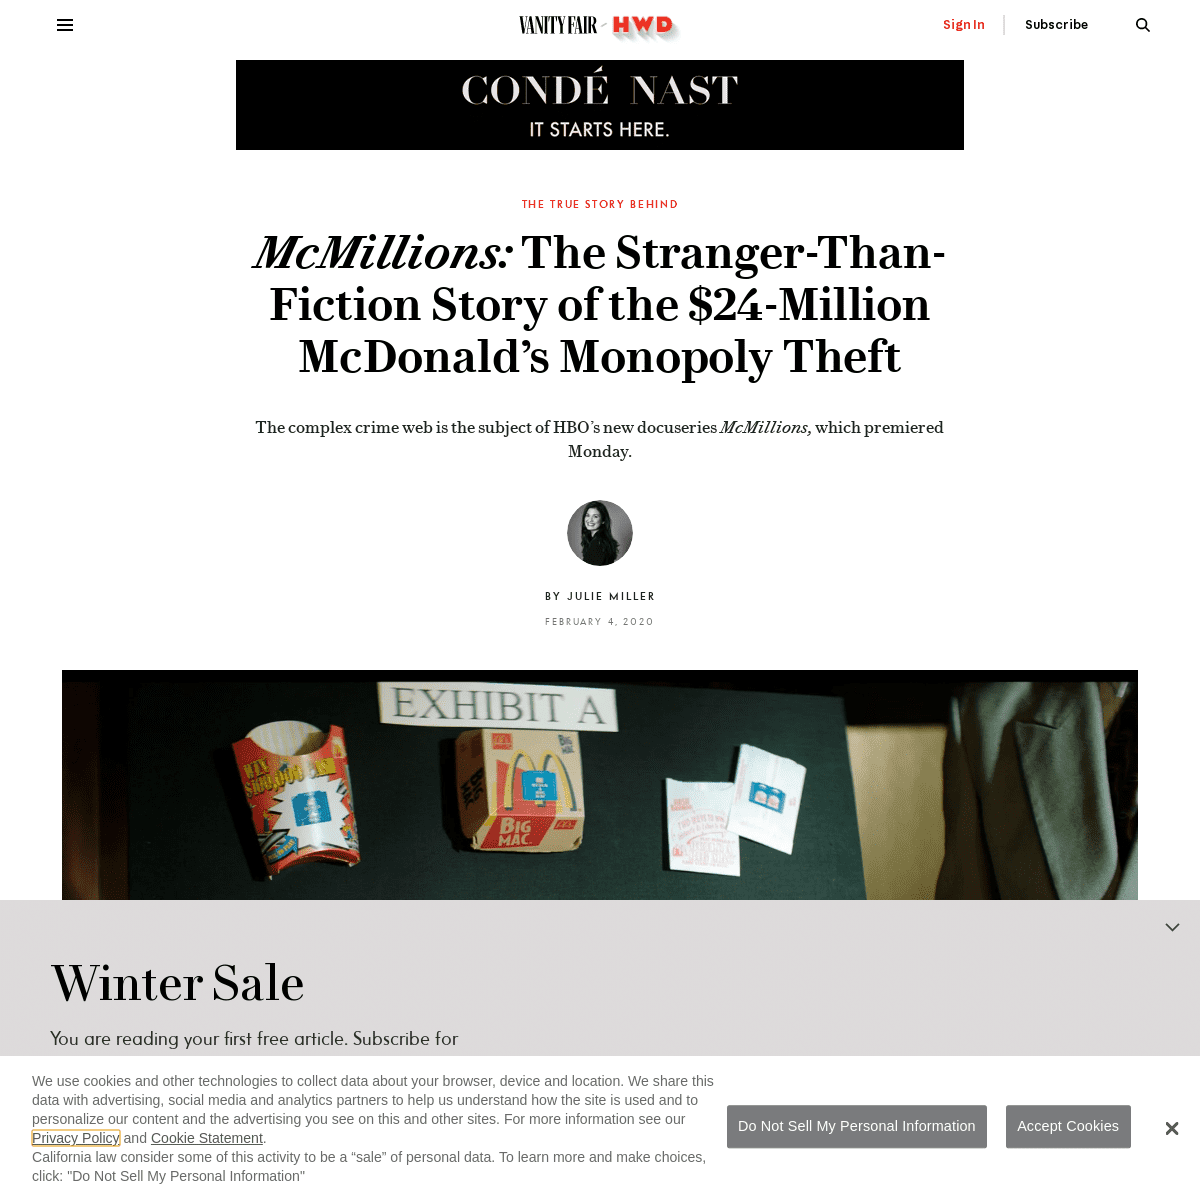 A complete backup of www.vanityfair.com/hollywood/2020/02/mcmillions-hbo-true-story